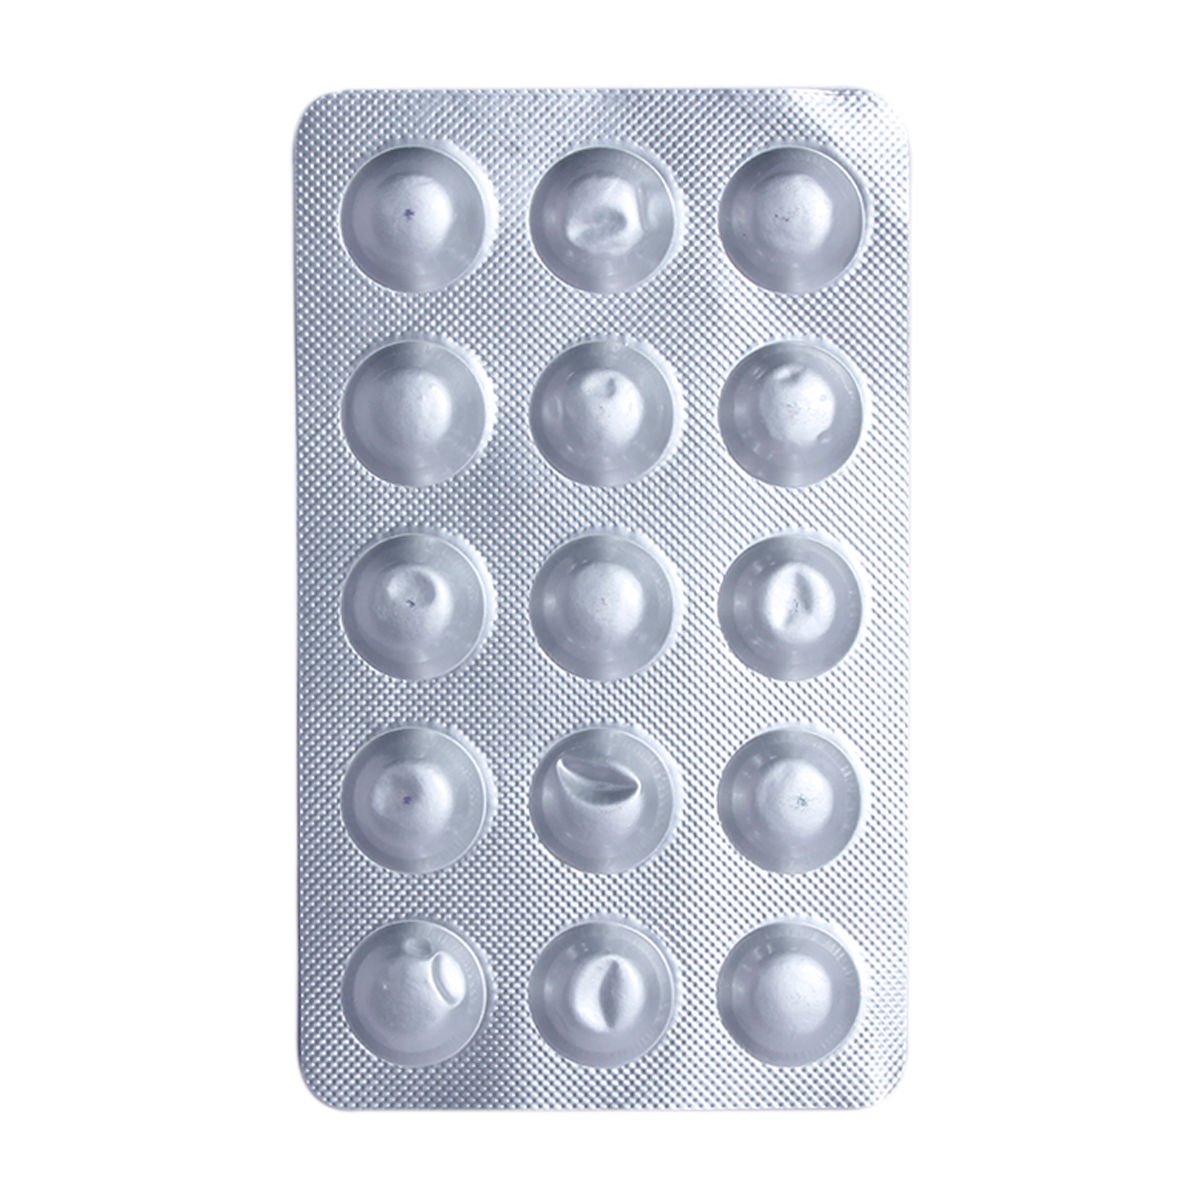 Tenebite Tablet 15's, Pack of 15 TabletS